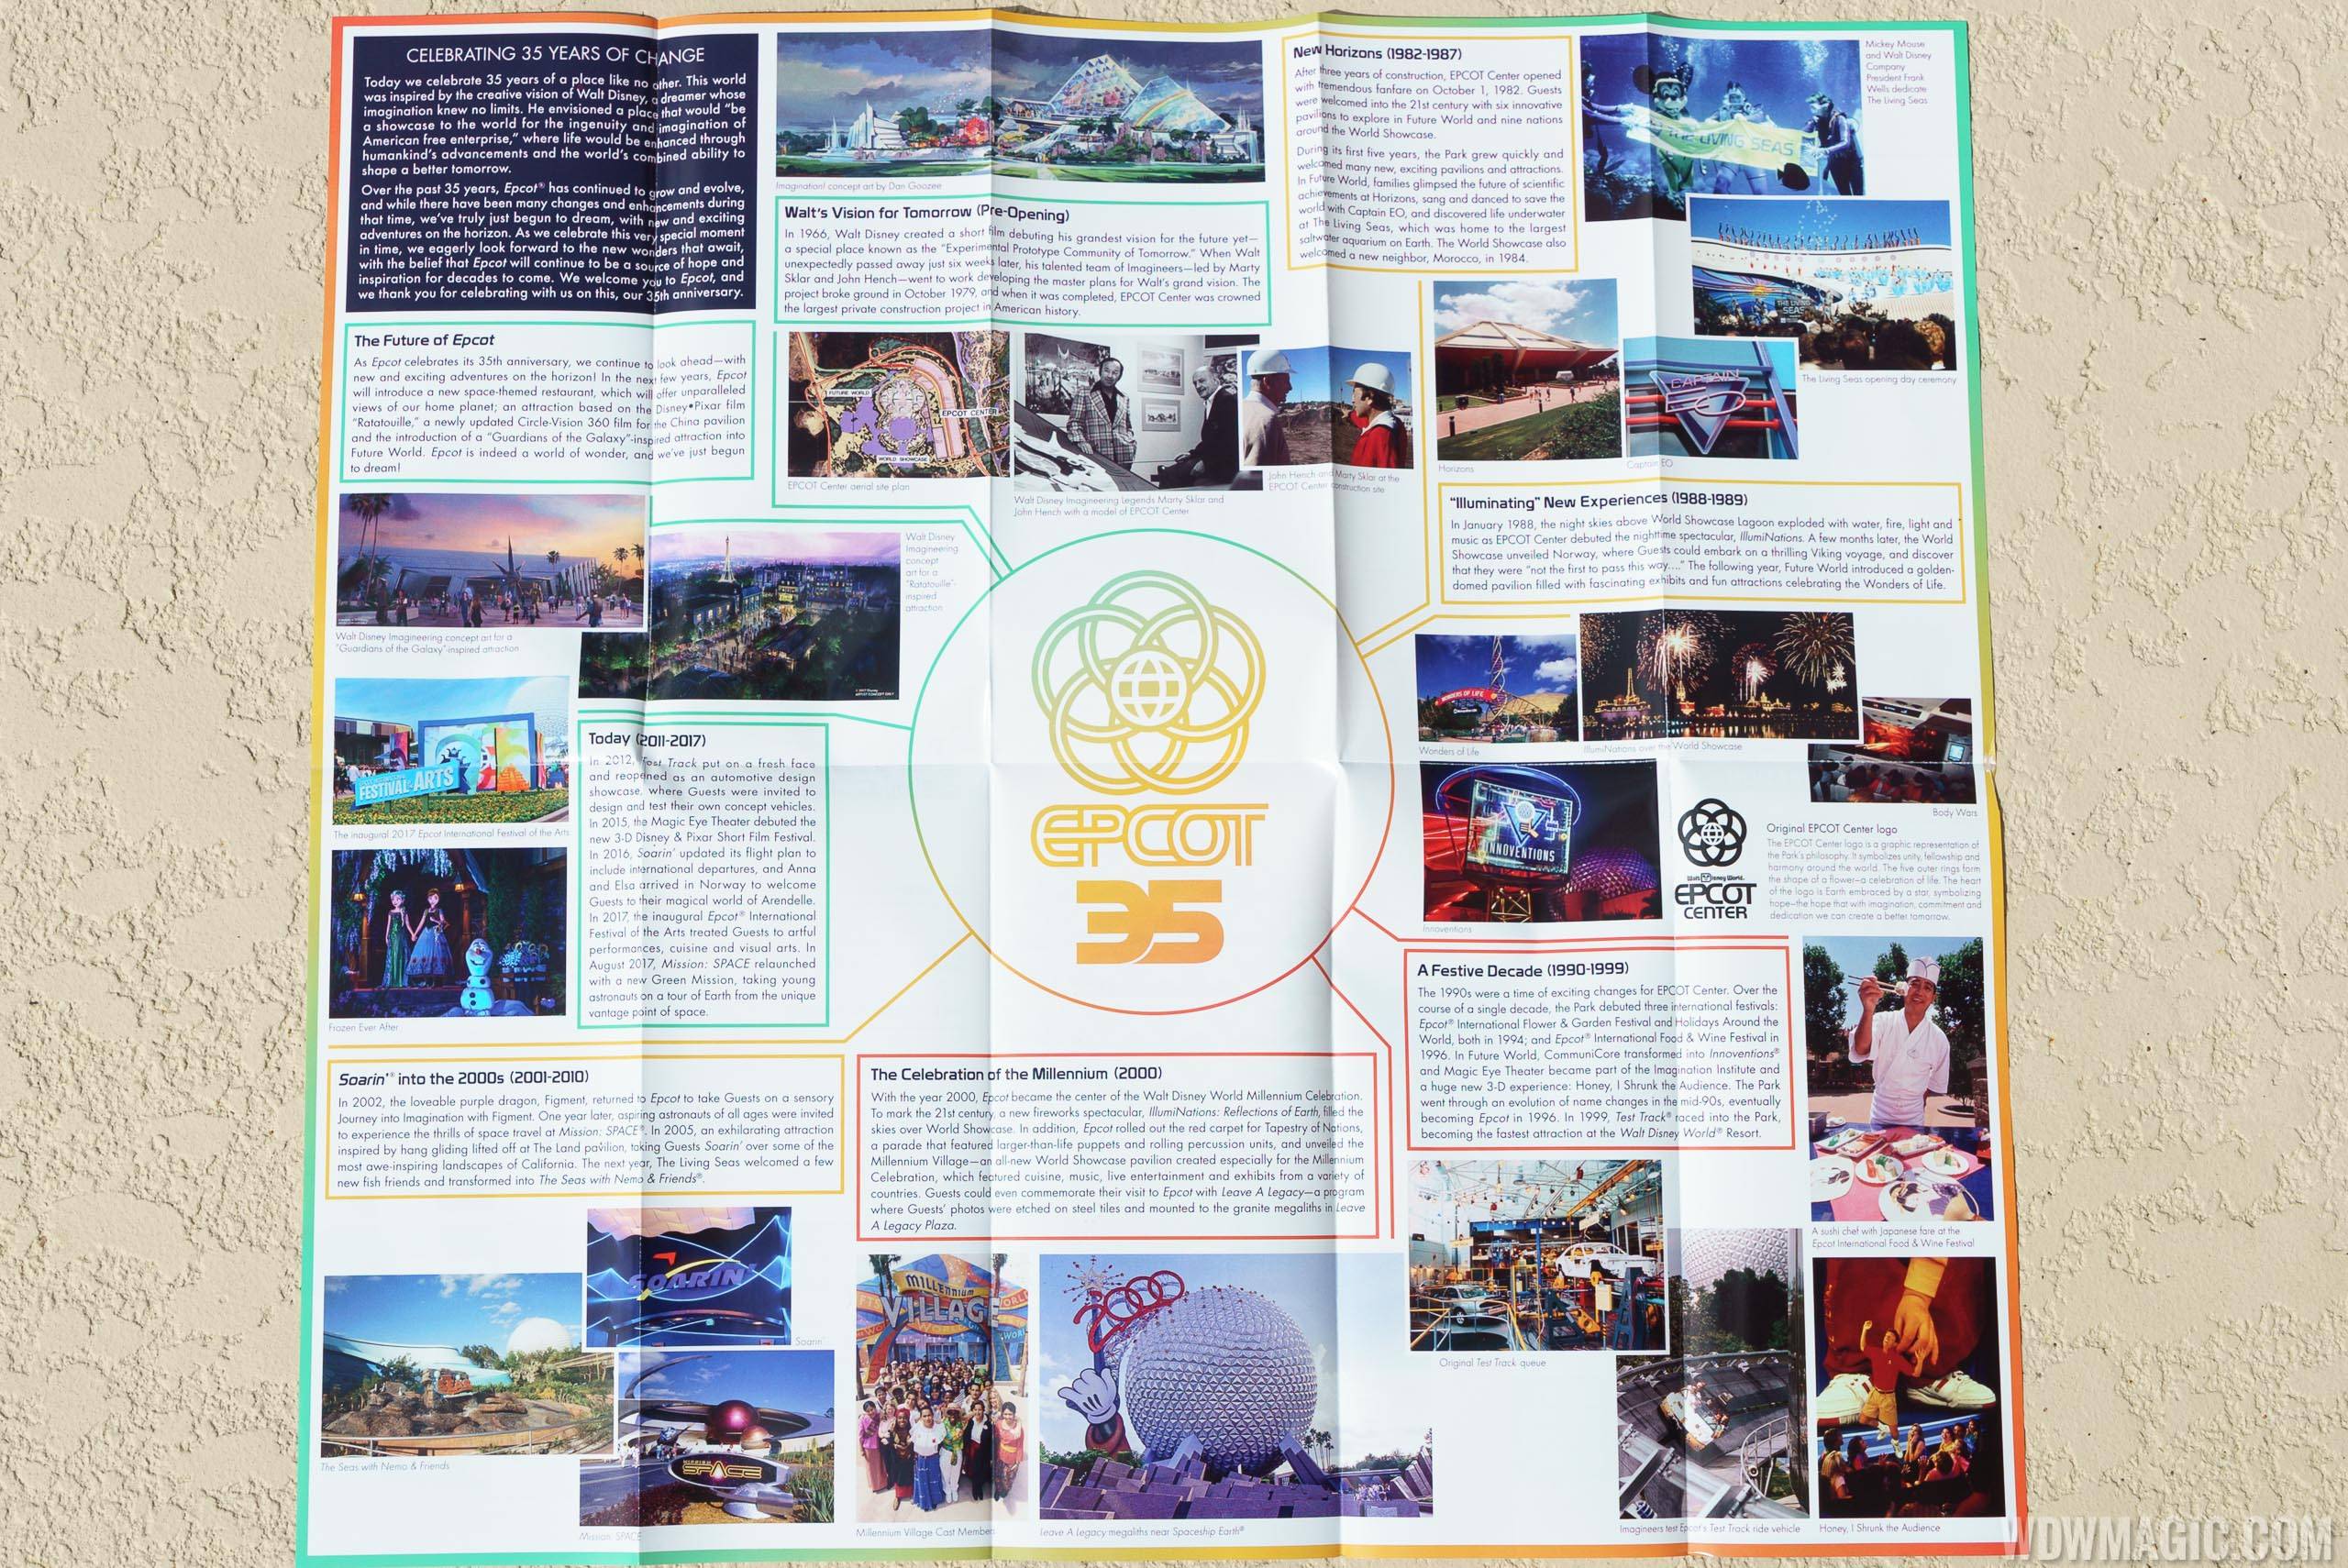 Inside the Epcot 35 Guide Map